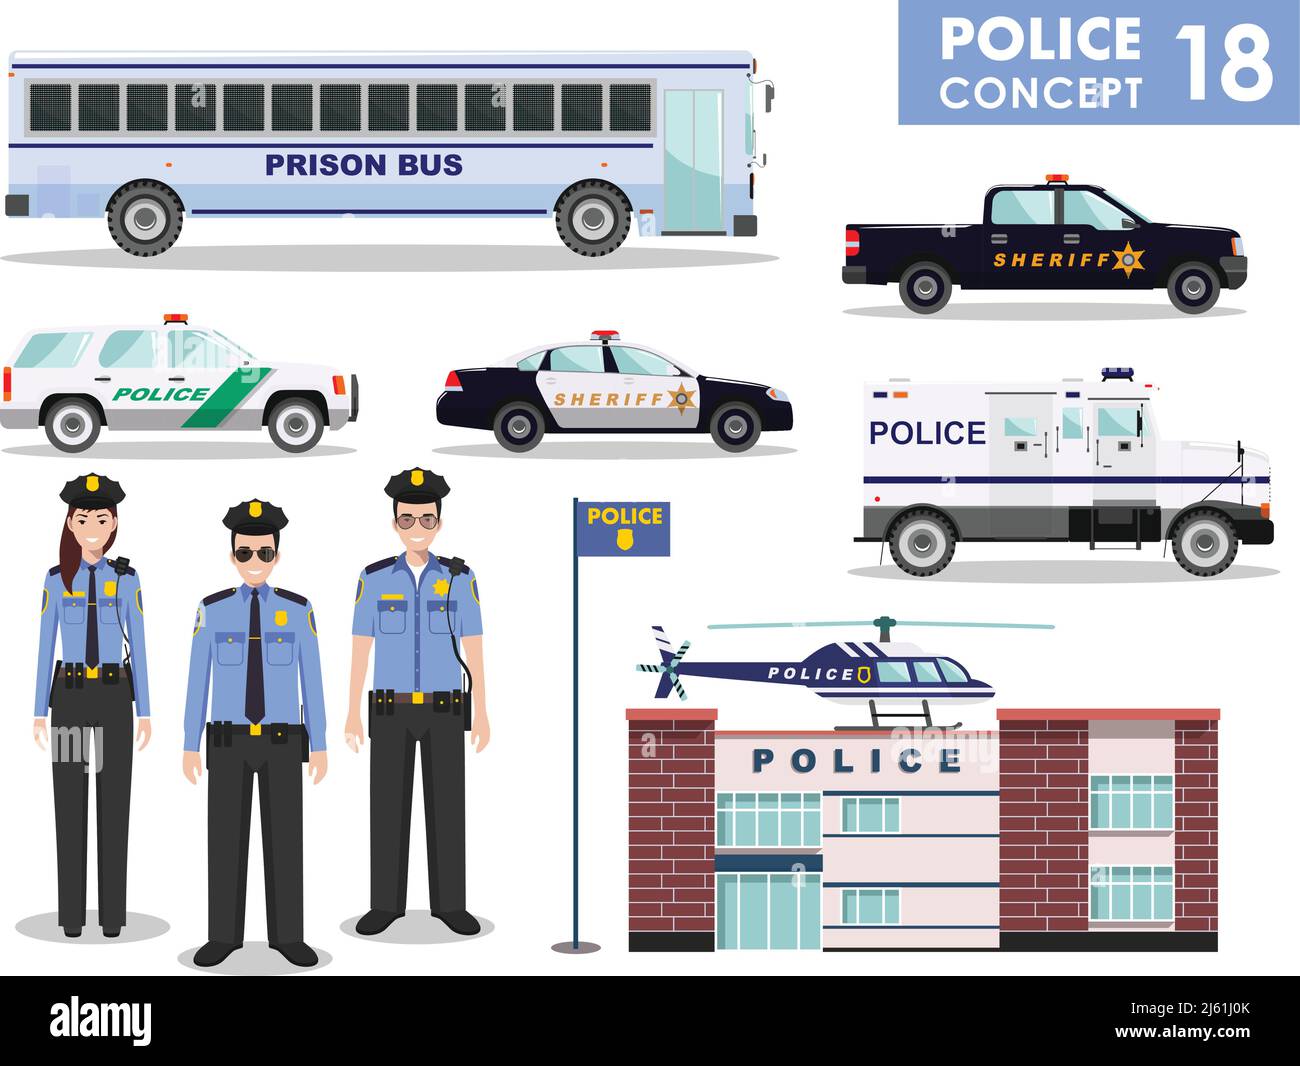 Detailed illustration of police department, police car, police officer, sheriff, helicopter, armored S.W.A.T. truck and prison bus in flat style on wh Stock Vector